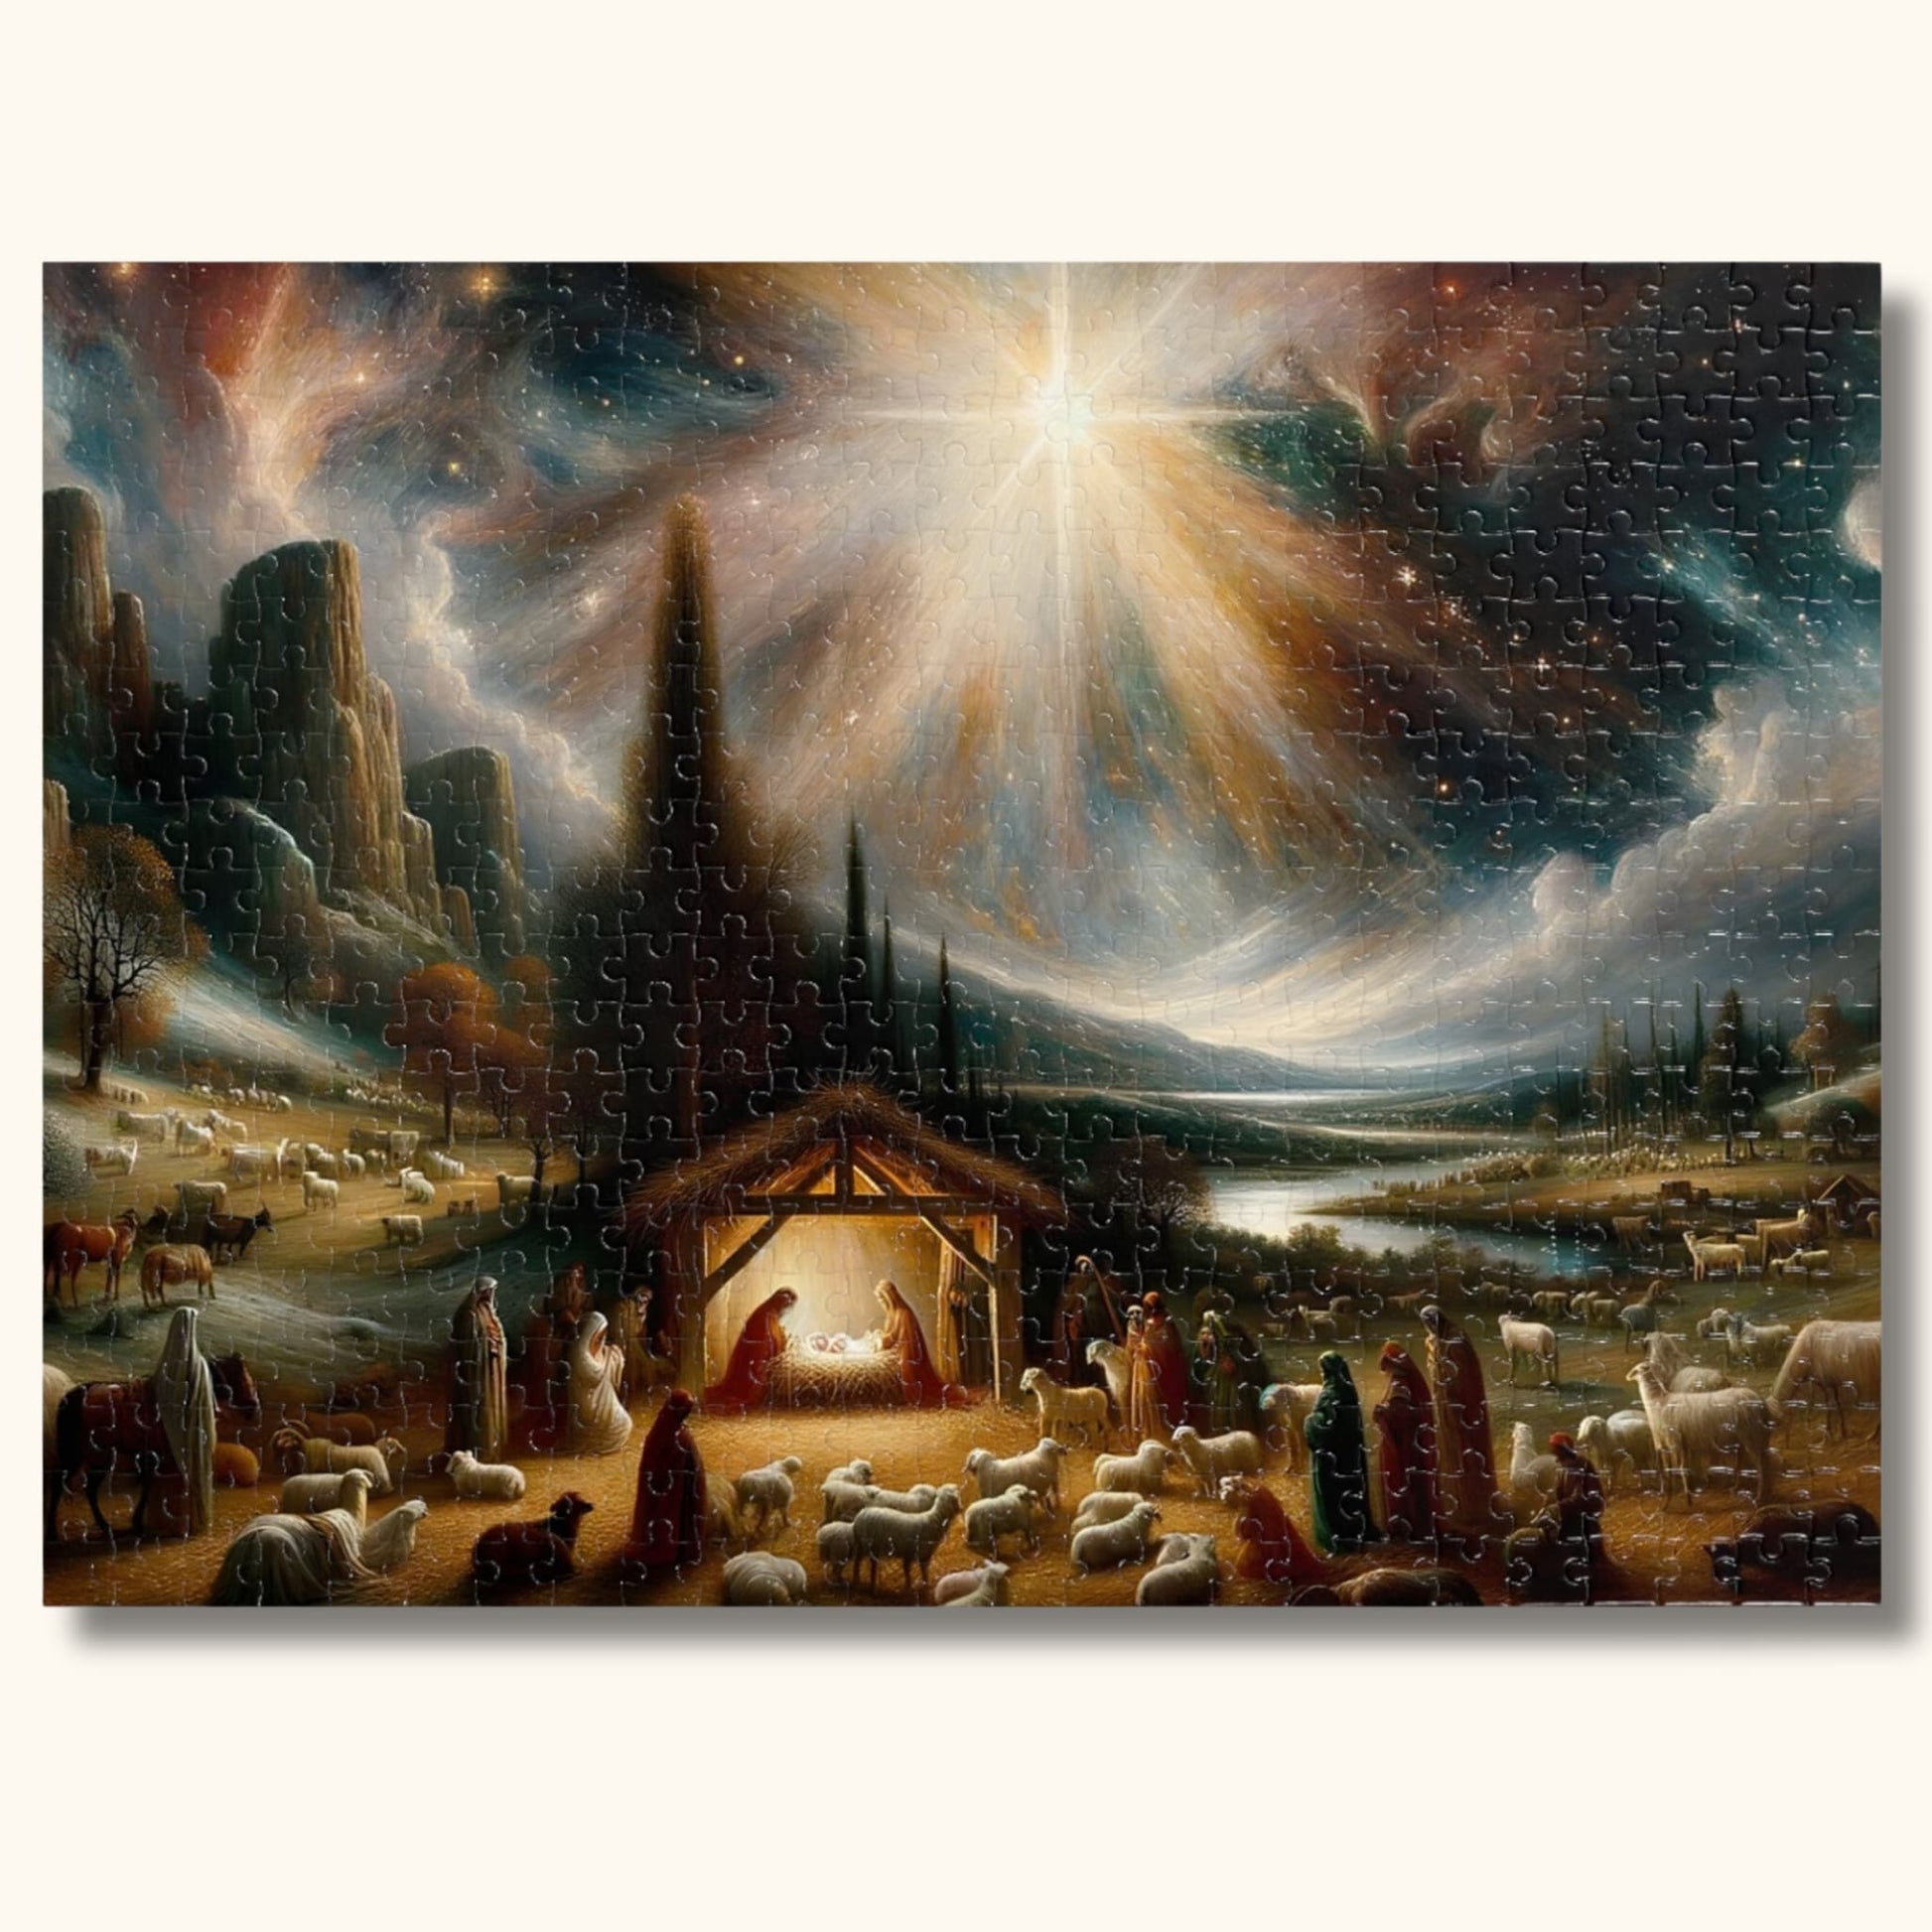 Main view of the 500-piece Oil-Painted Nativity Scene Jigsaw Puzzle.